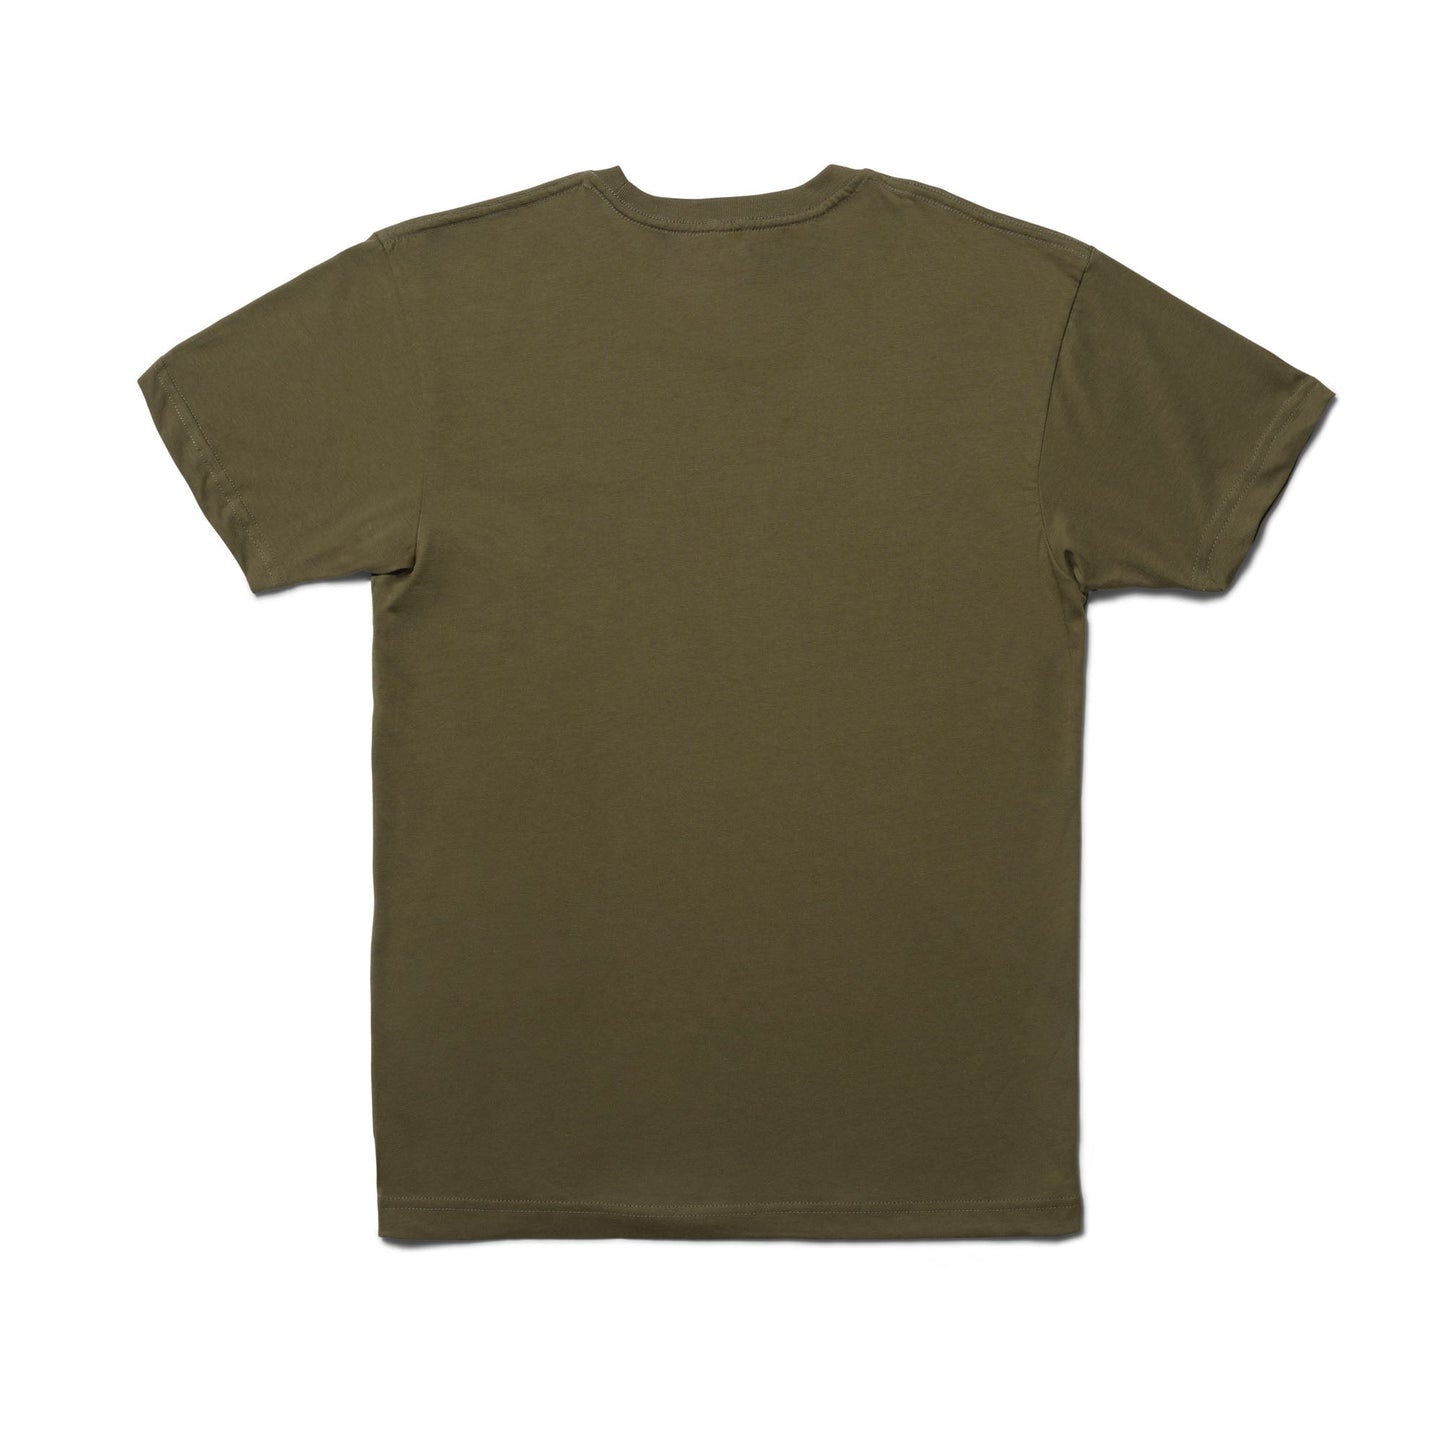 Stance Russ Pope T-Shirt Military Green